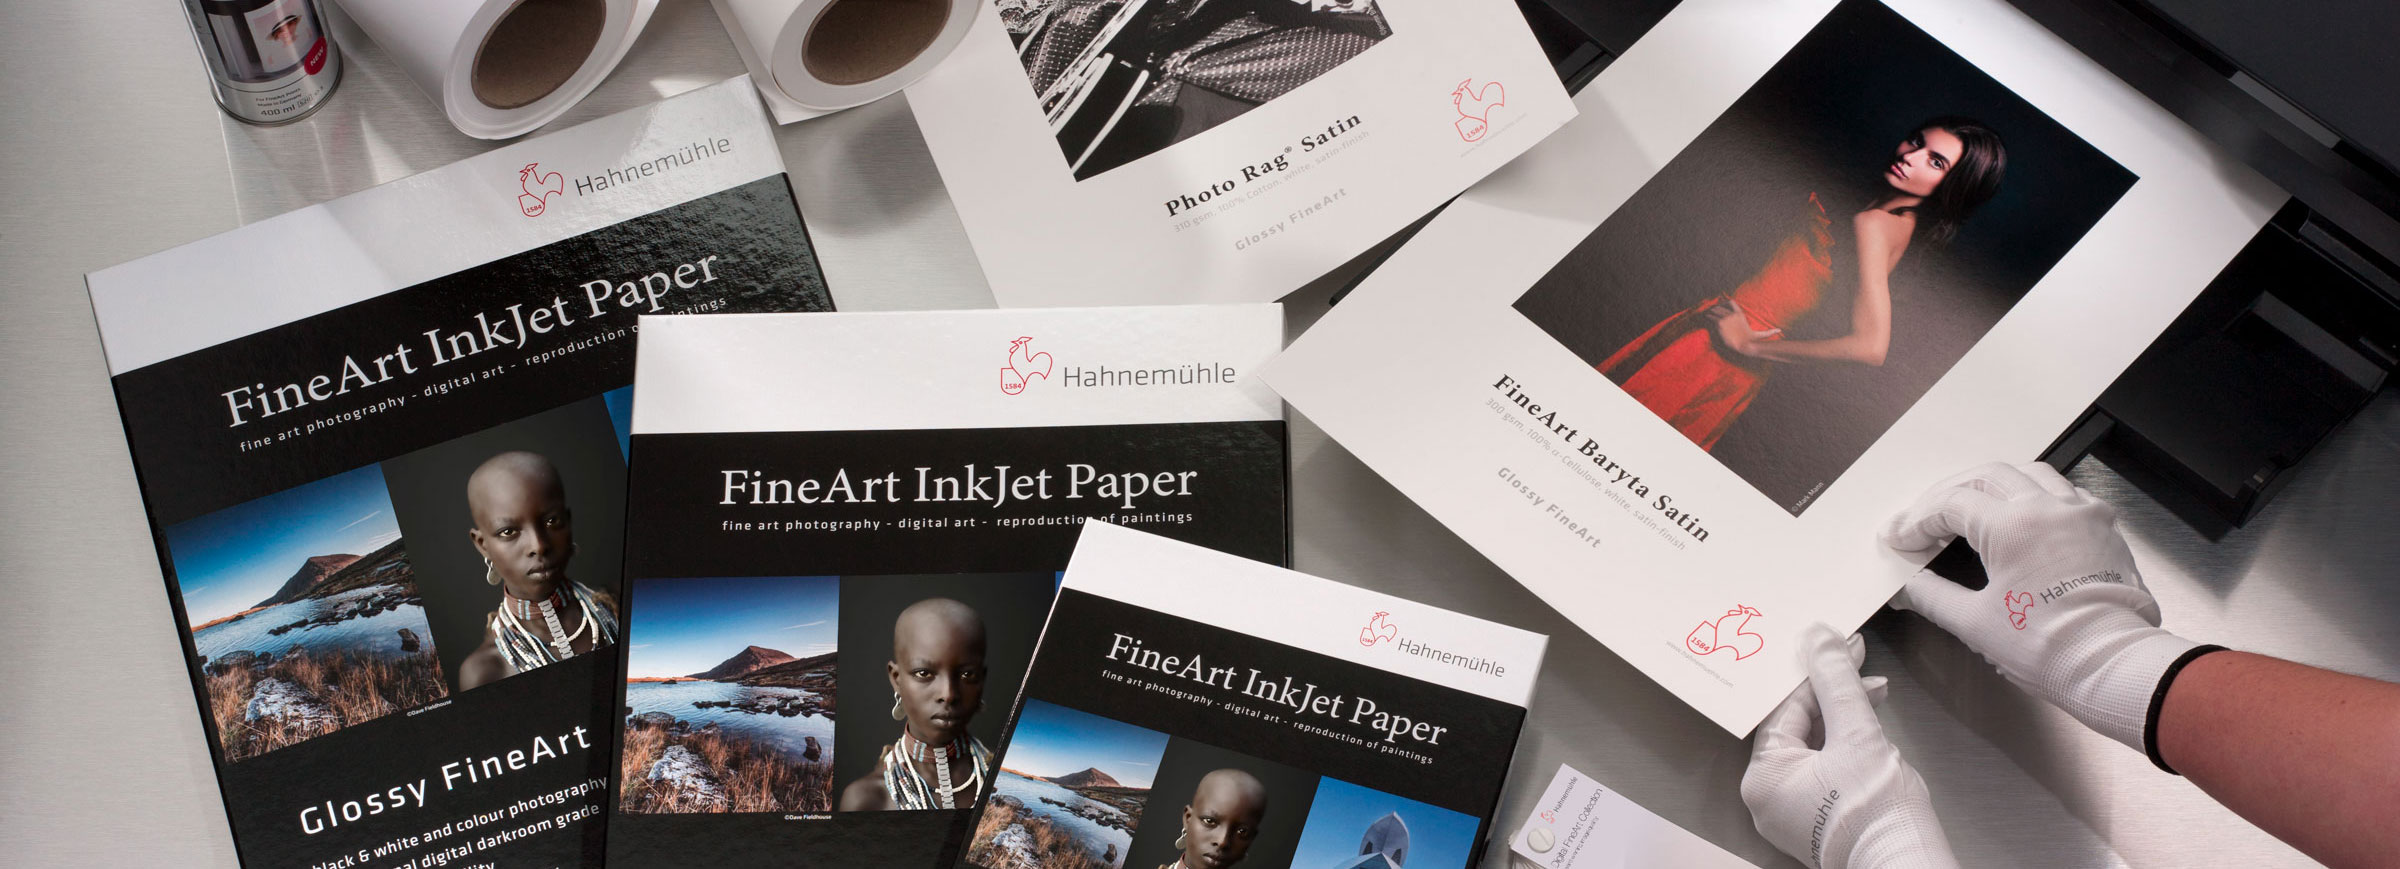 Glossy FineArt Papers as boxes and printed sheets